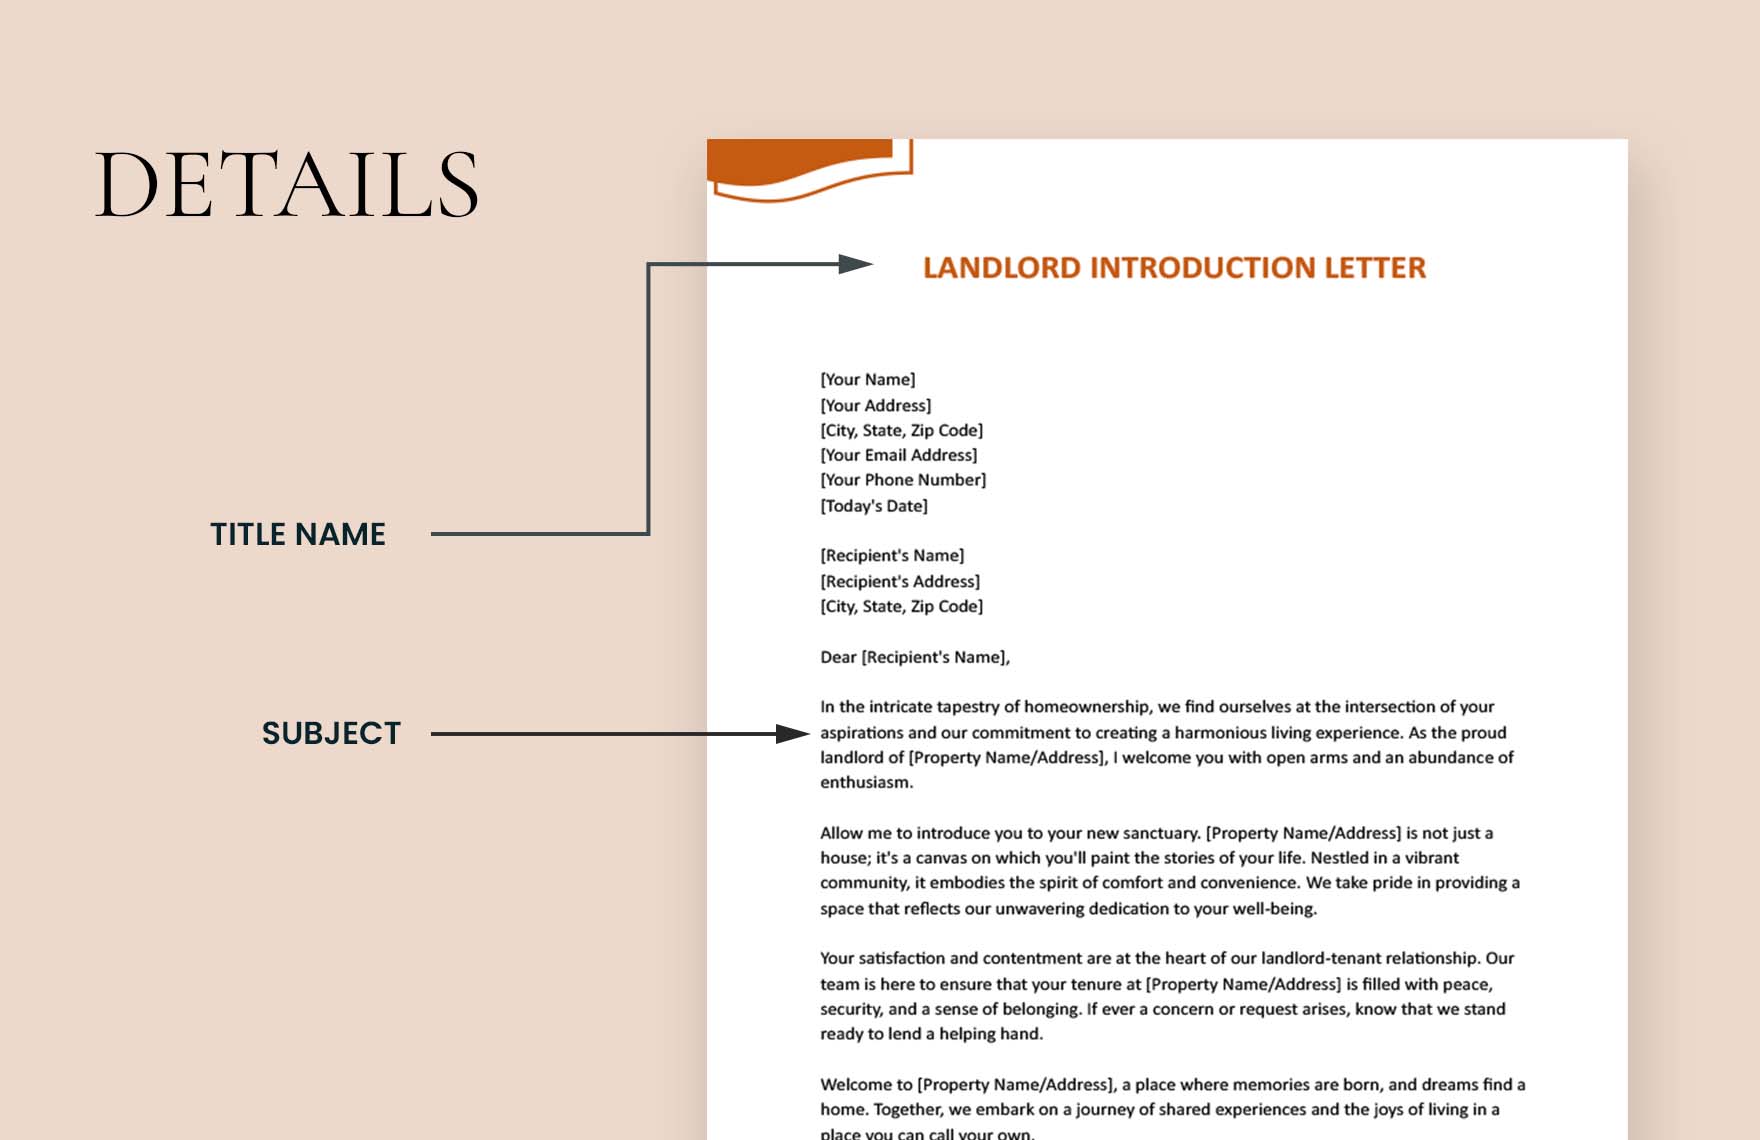 Landlord Introduction Letter